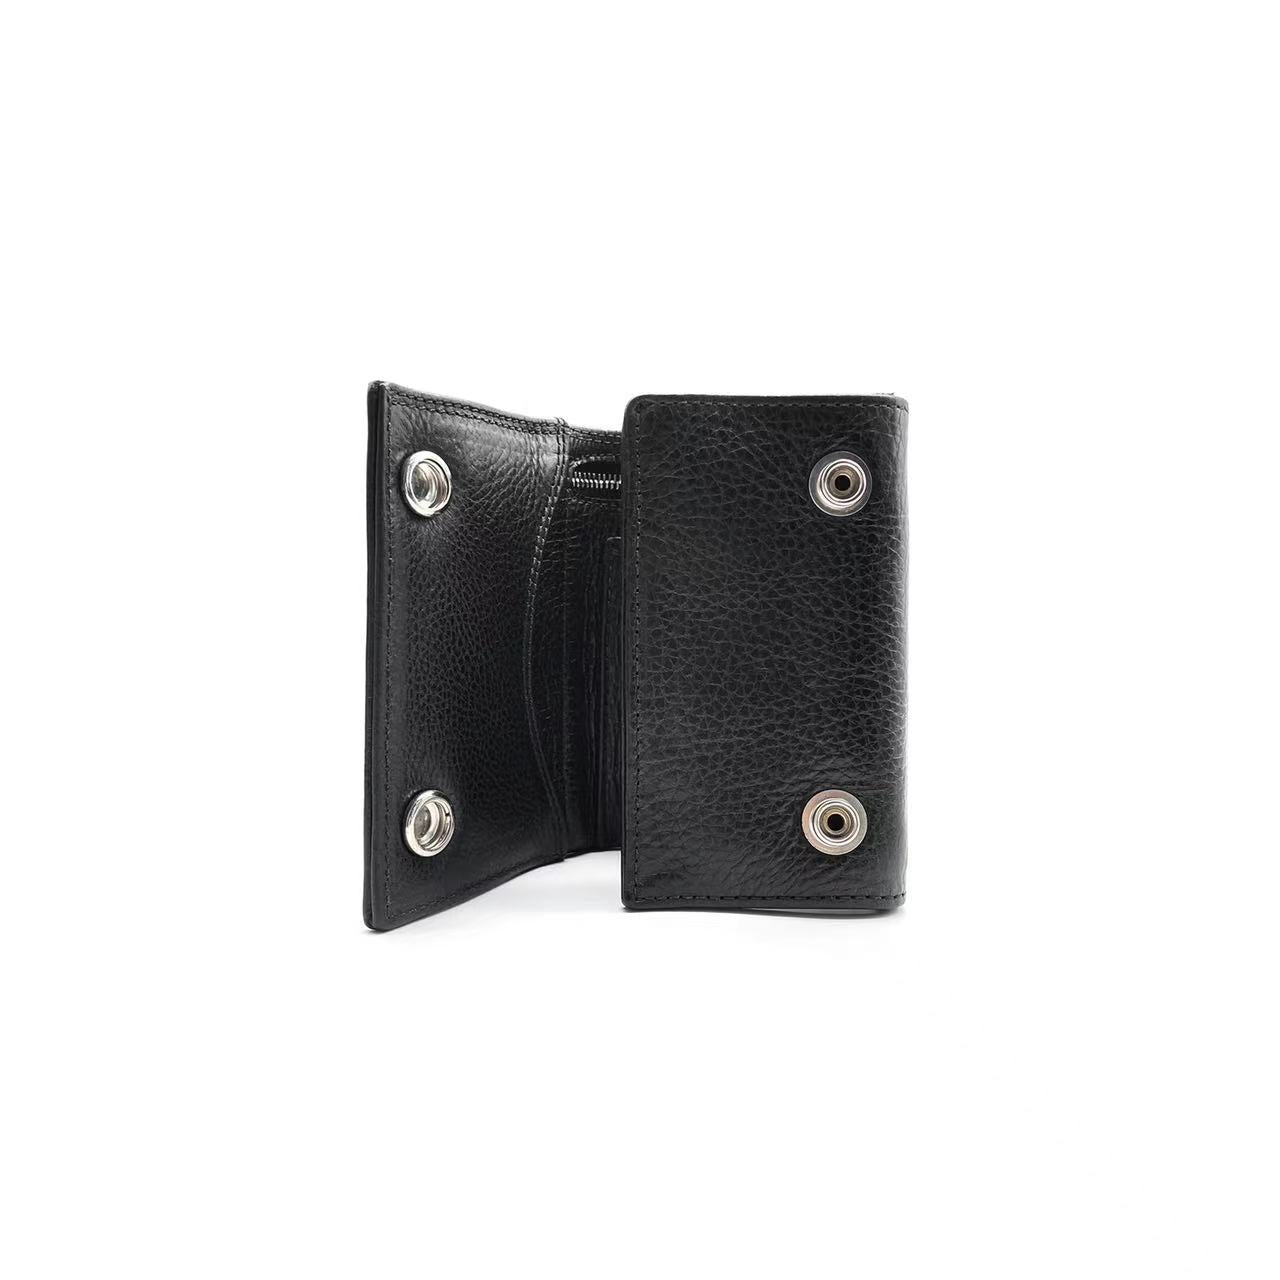 Chrome Hearts Leather Cross Silver Buttons Folded Wallet Card Holdera - SHENGLI ROAD MARKET